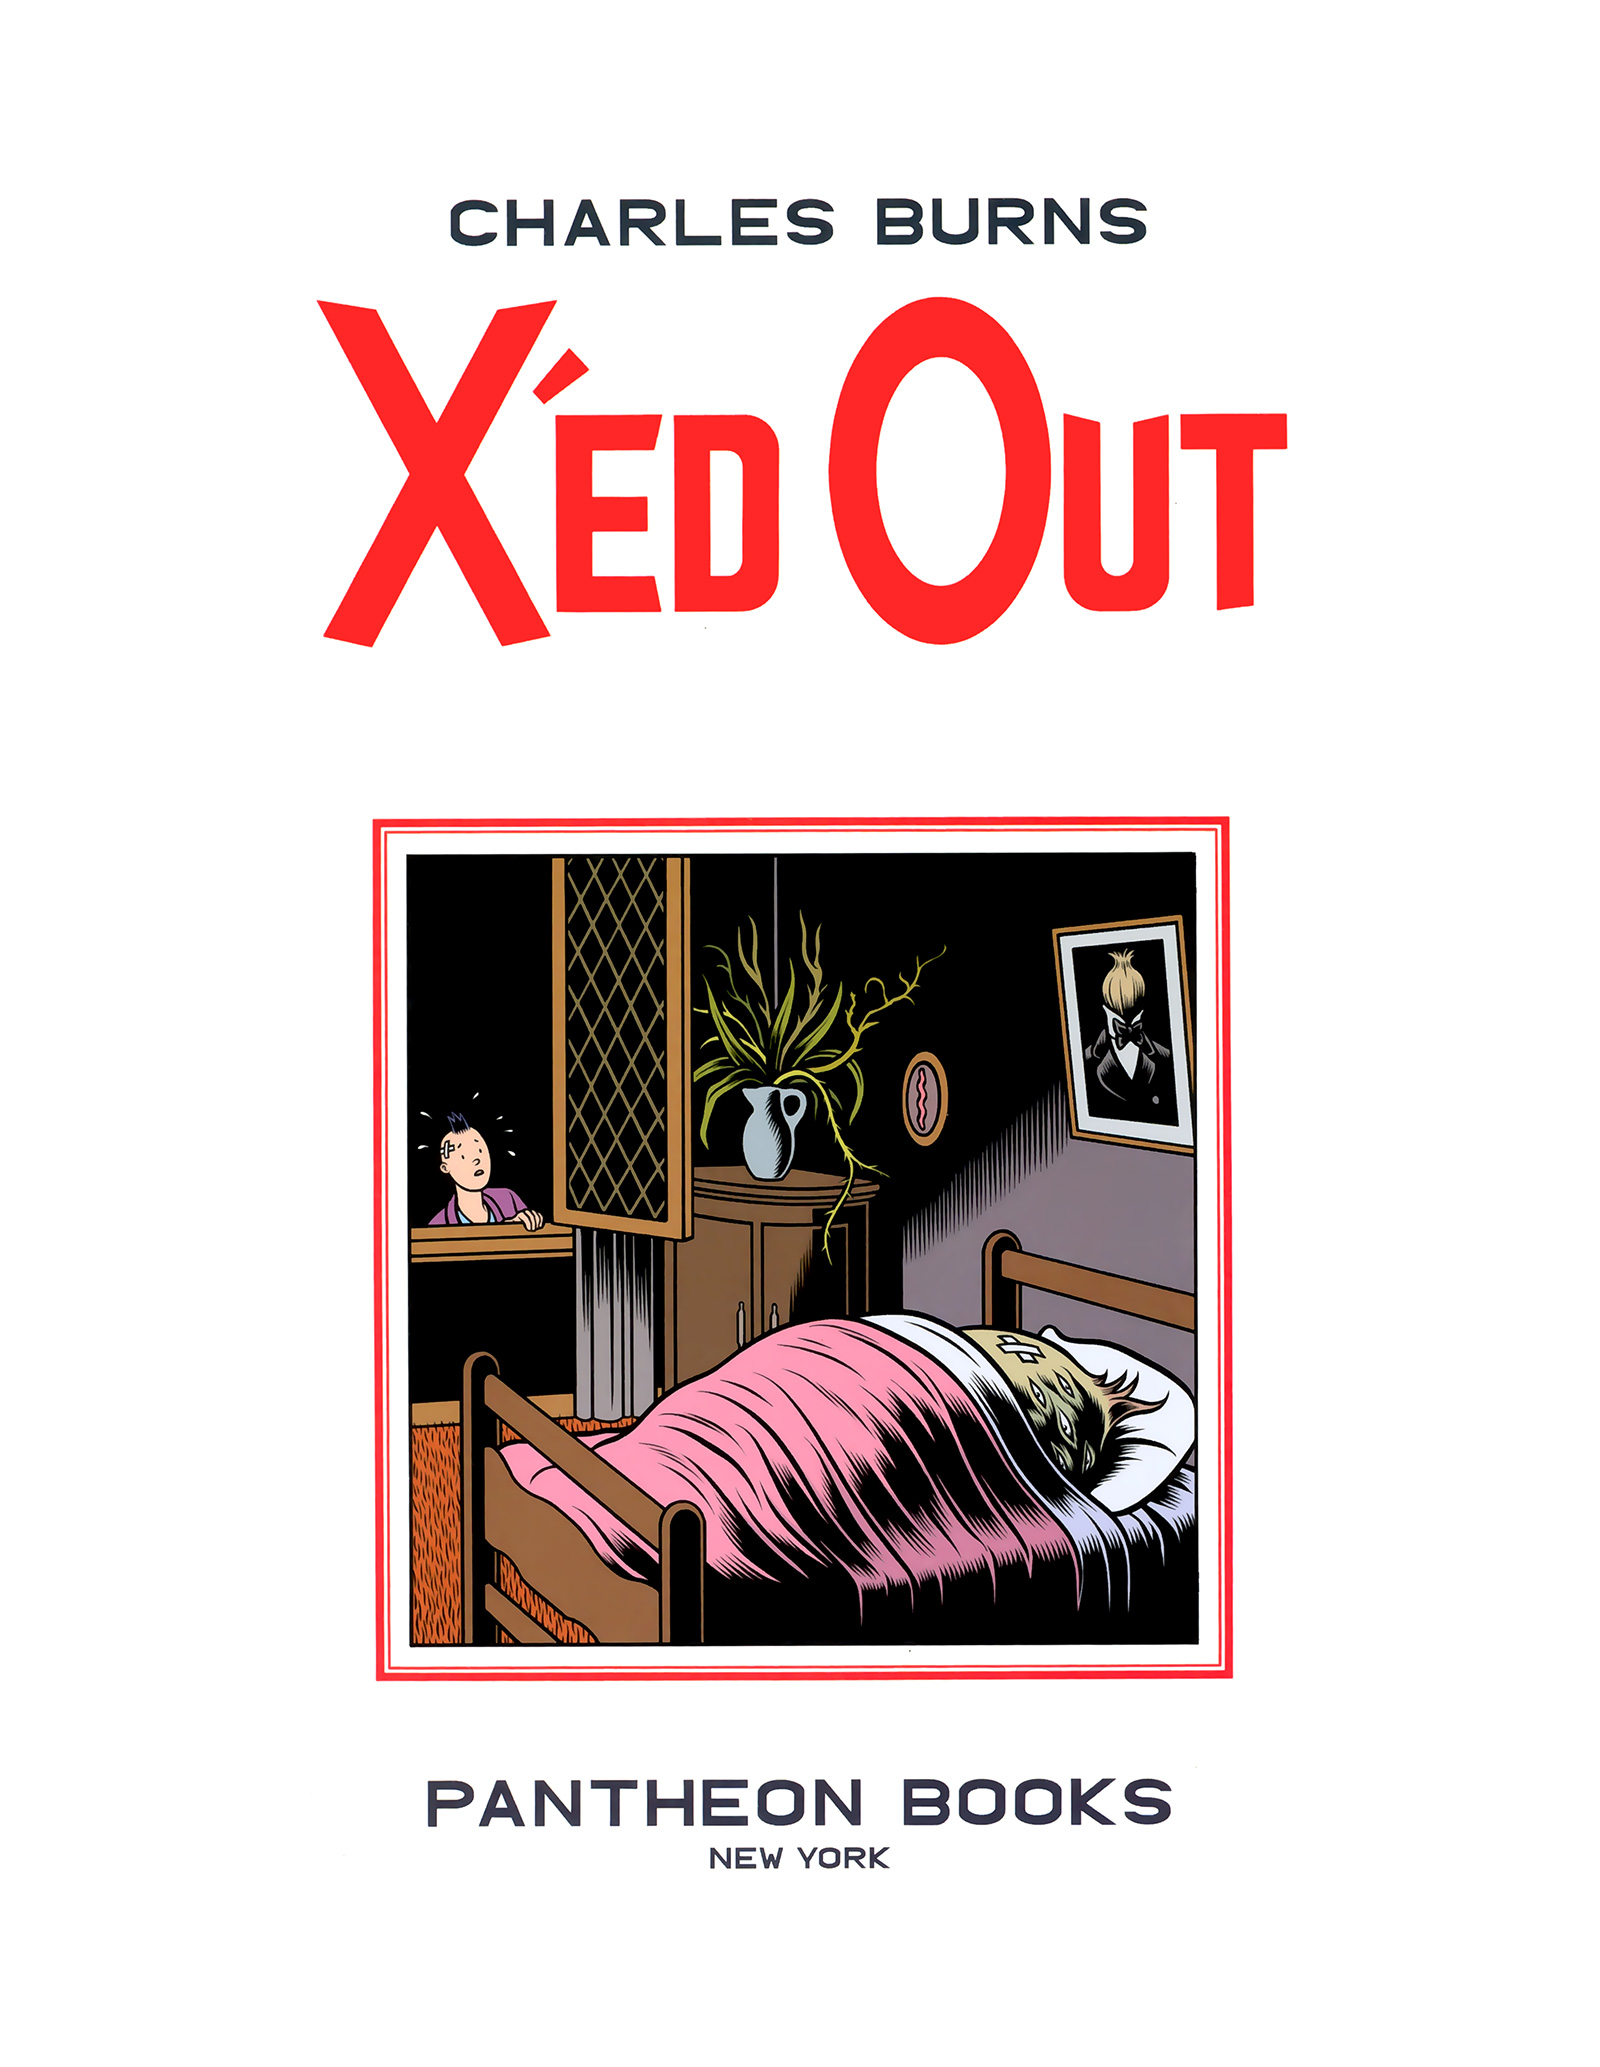 Read online X'ed Out comic -  Issue # Full - 6